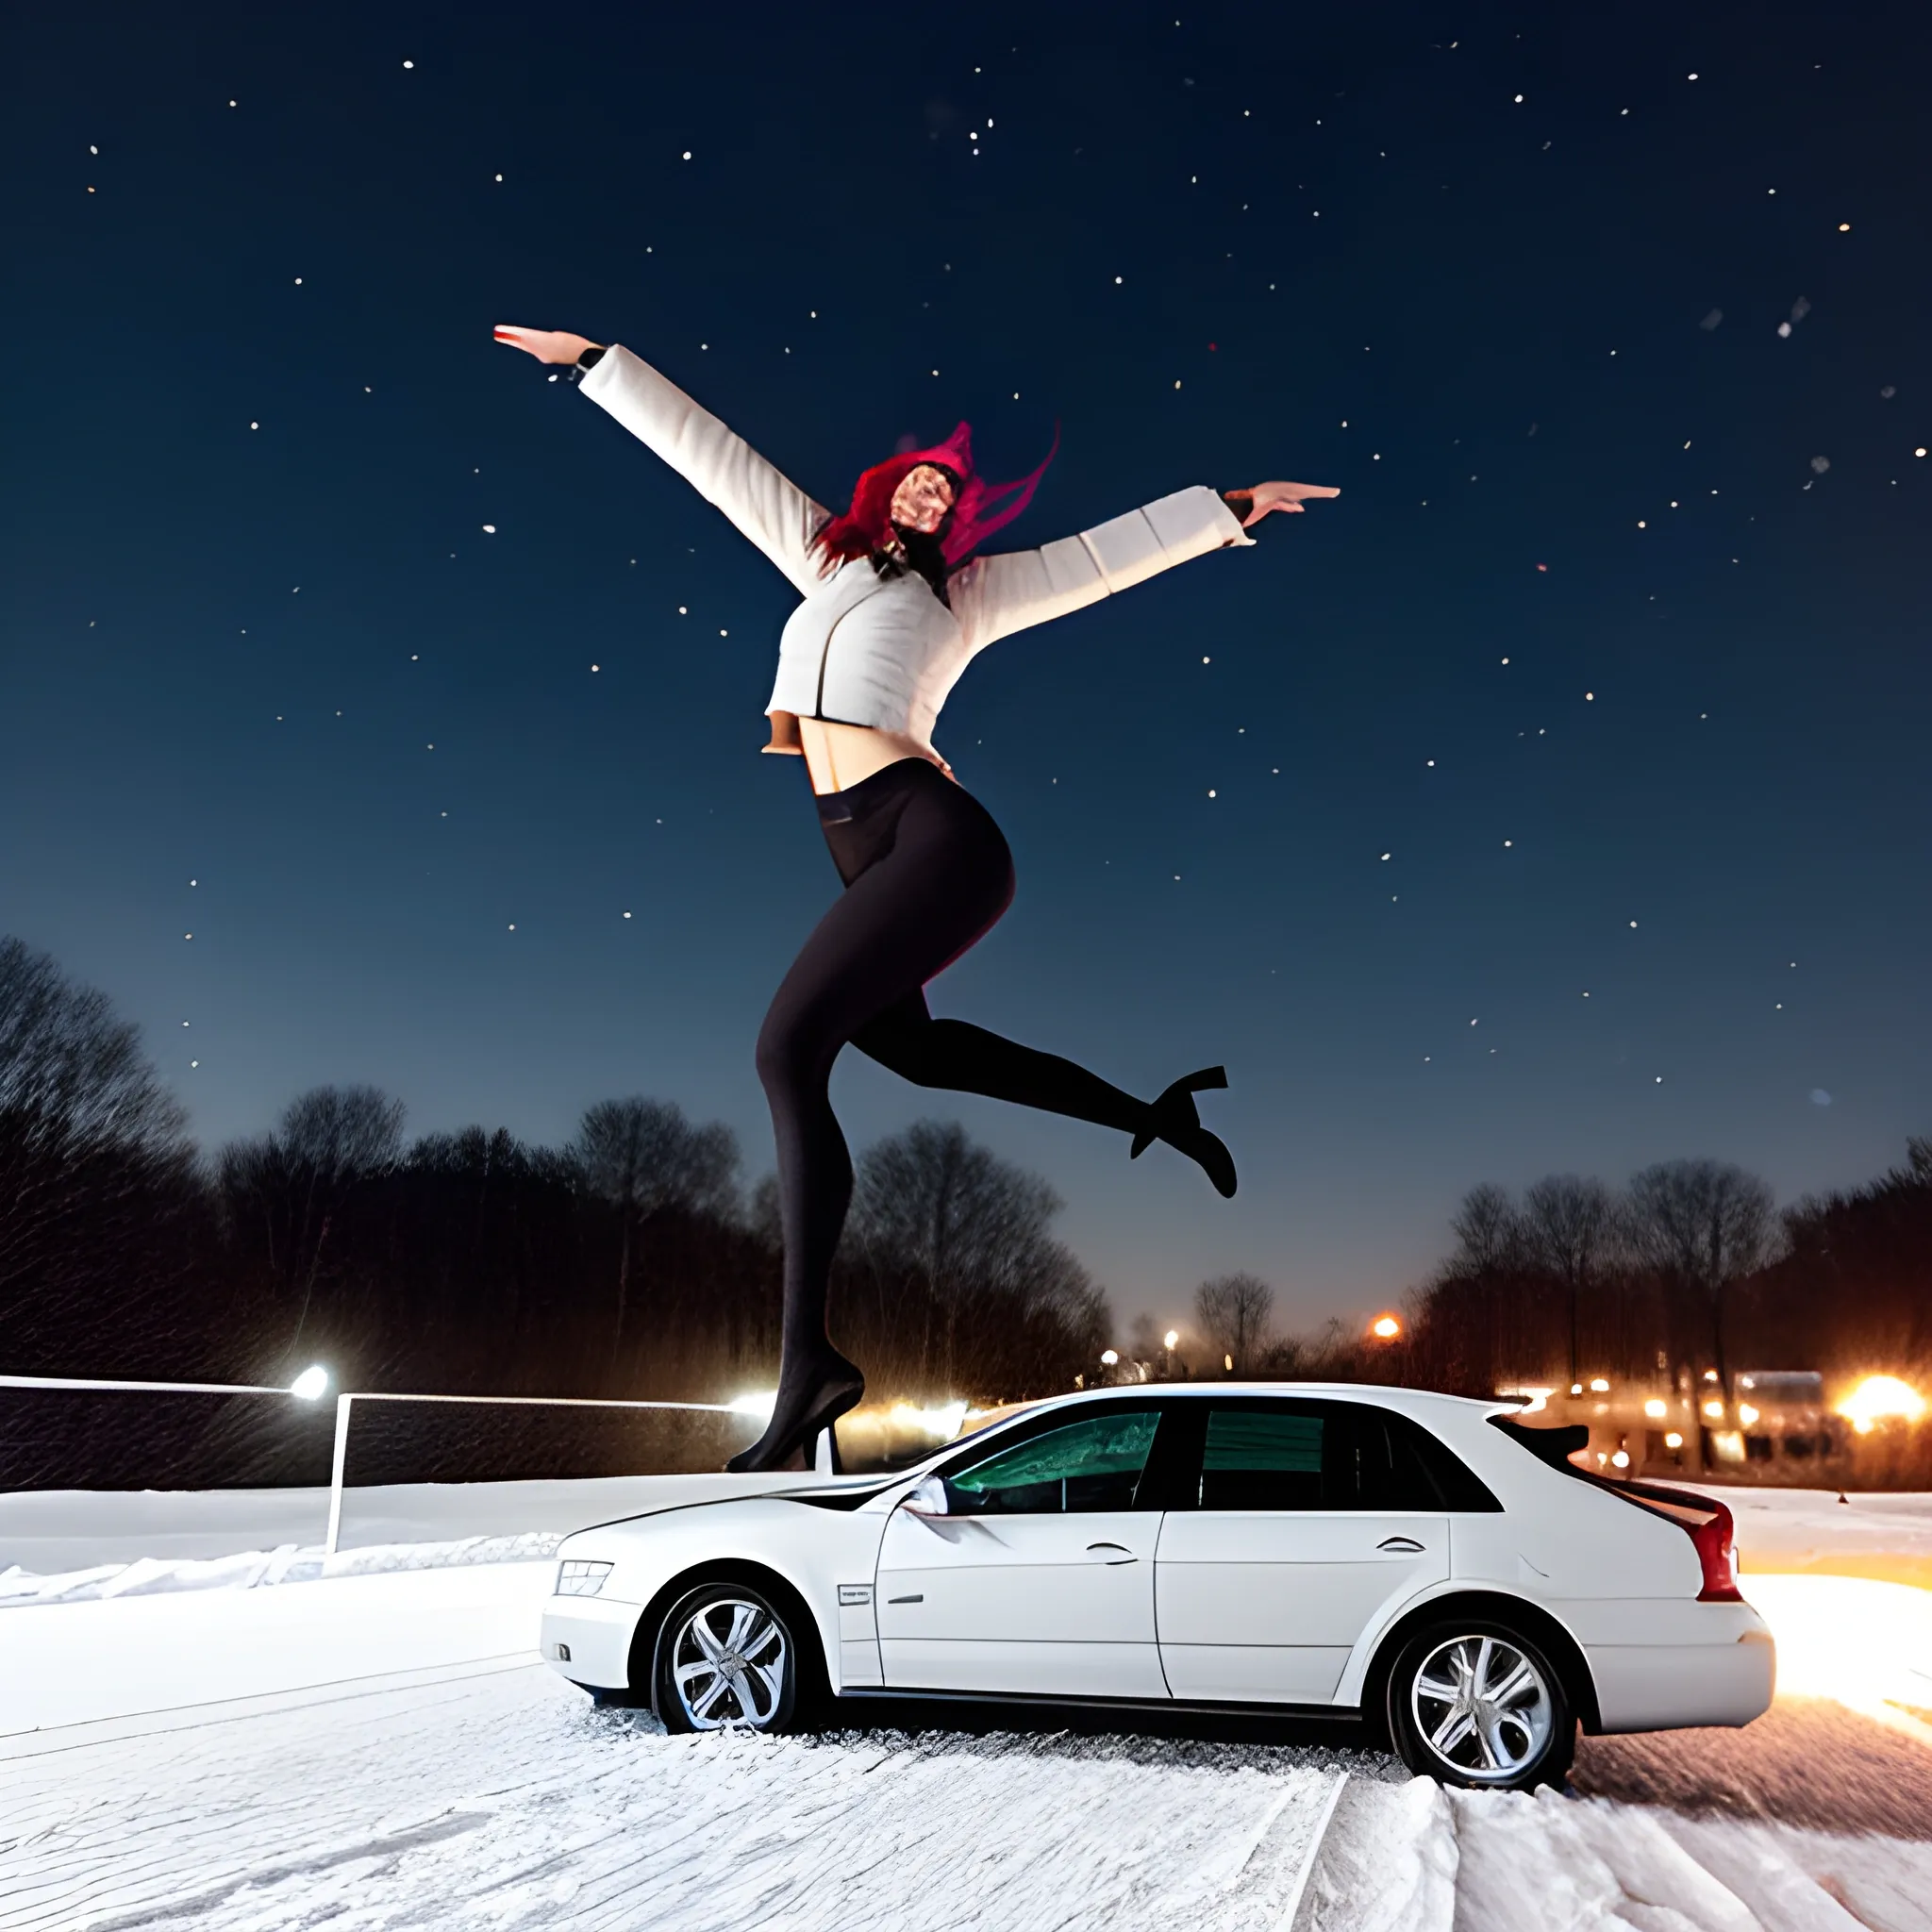 young girl dancing on a roof of a car in the snow in the night